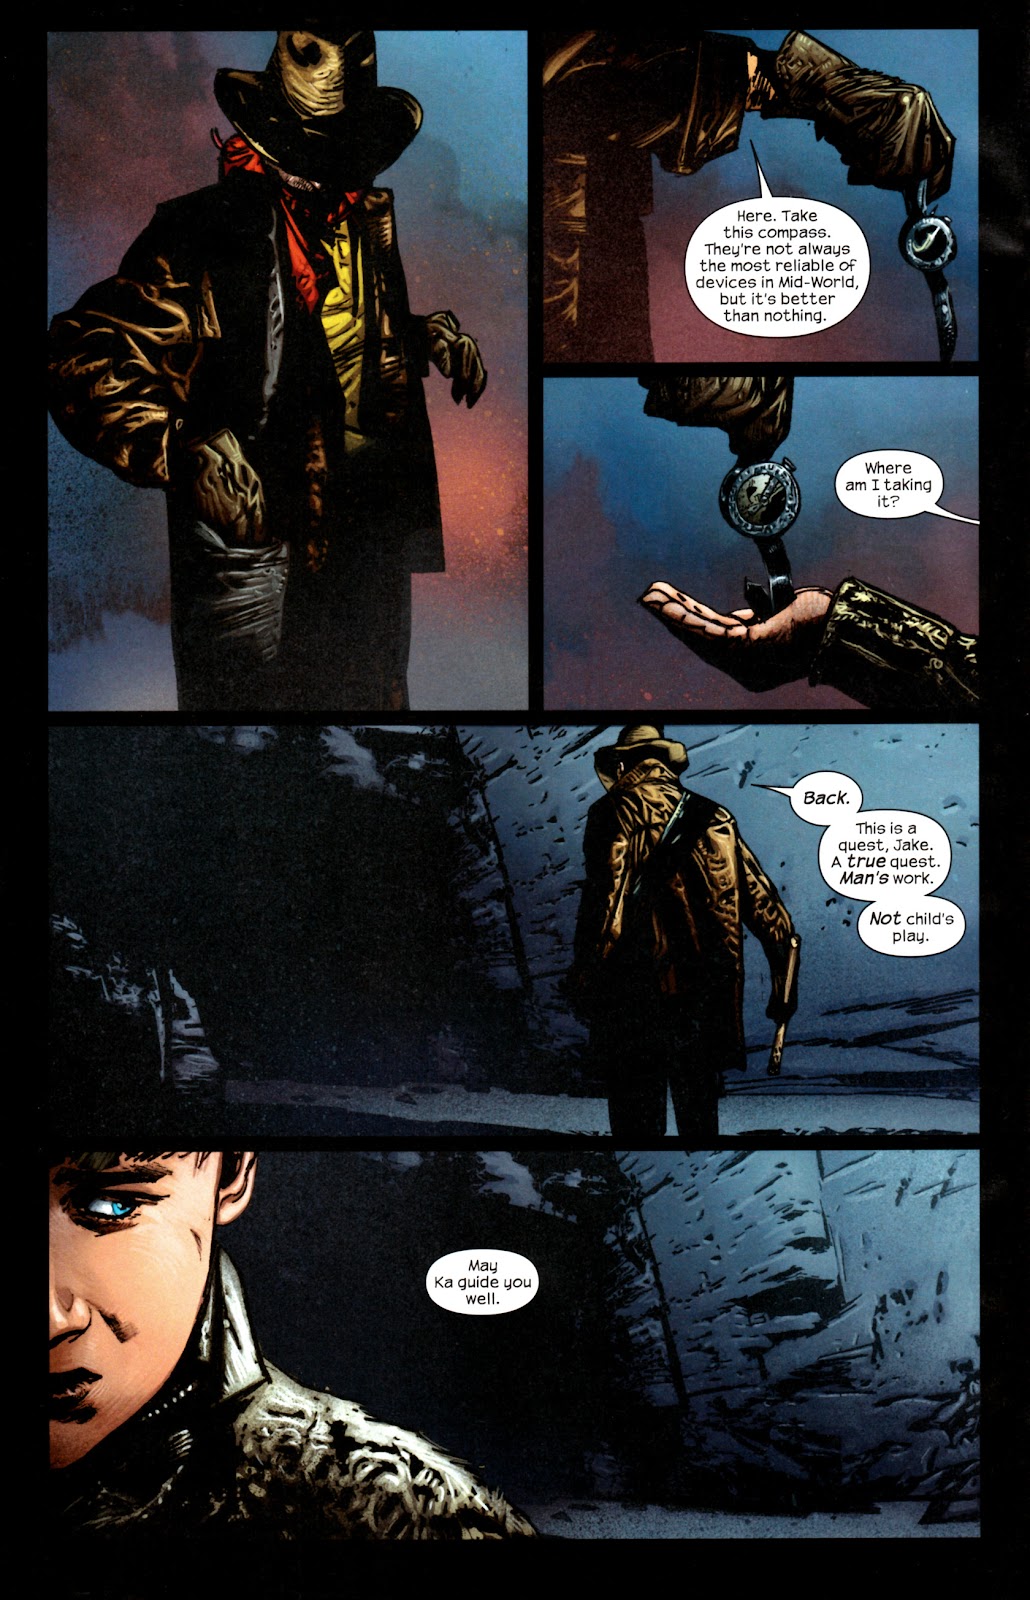 Dark Tower: The Gunslinger - The Man in Black issue 1 - Page 10